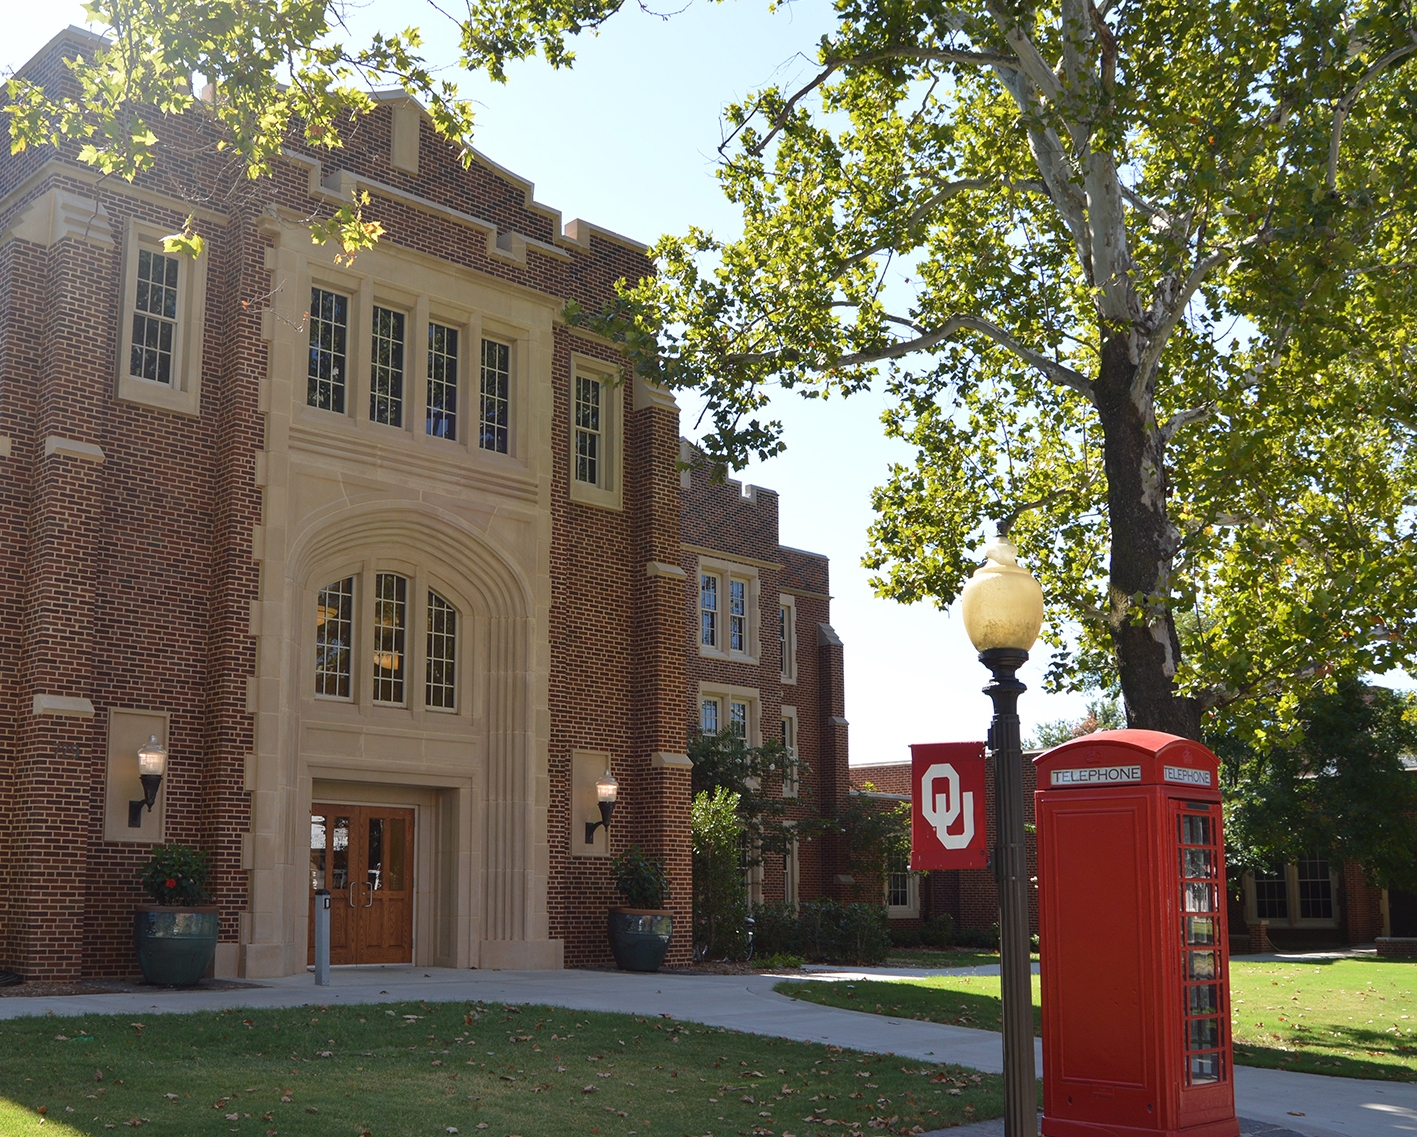 Farzaneh Hall, with trees, a lamppost with an OU flag, and a red phone booth.